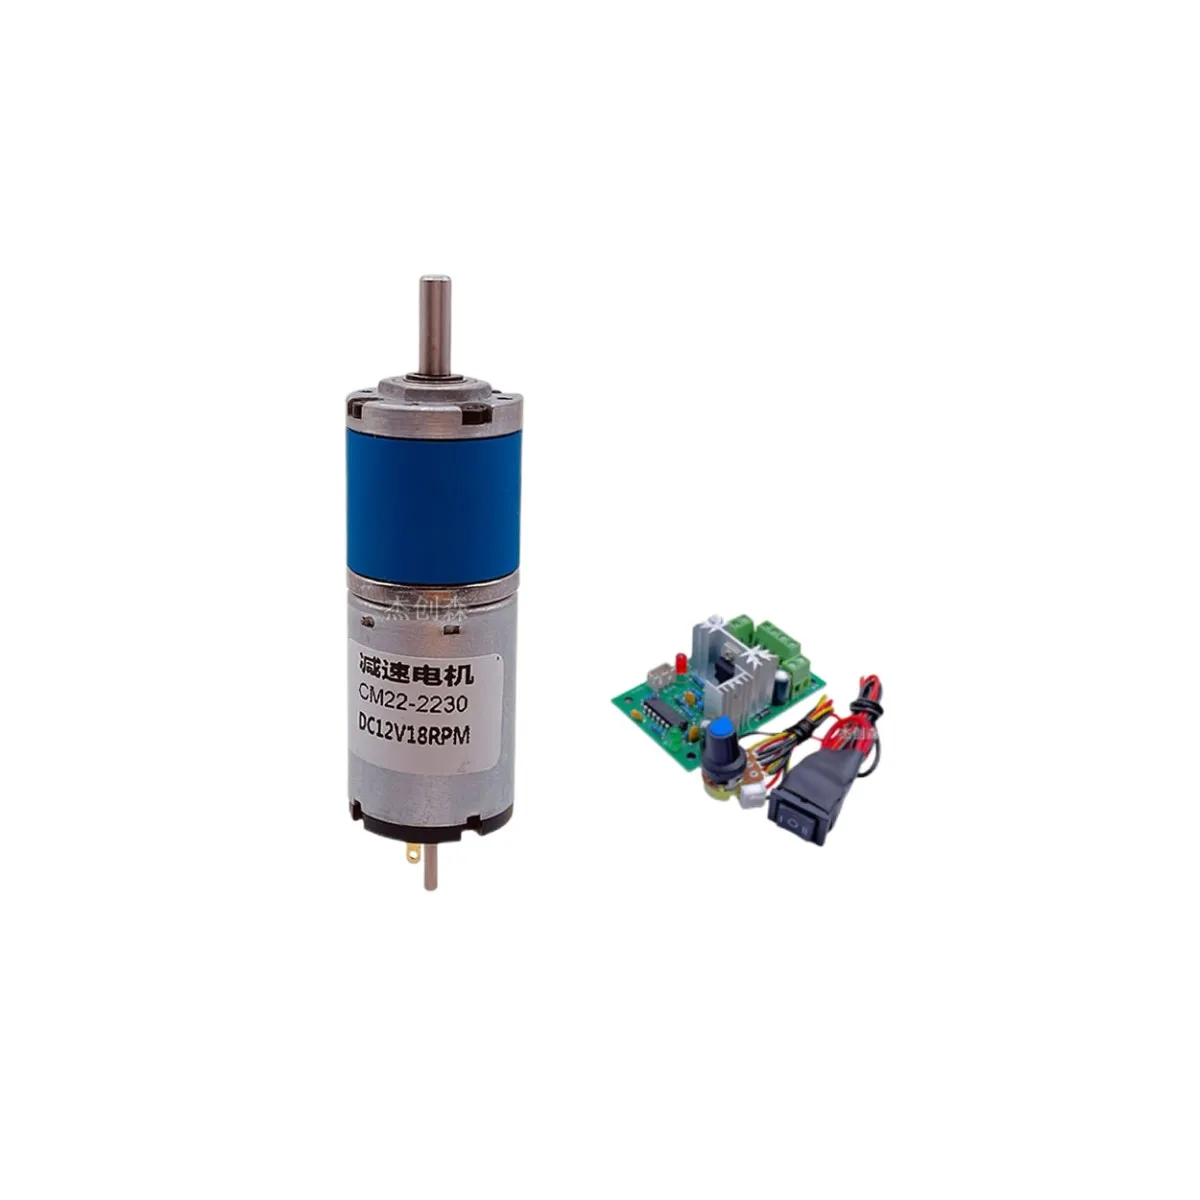 

22mm planetary gear reduction motor 12V24V low noise high torque forward and reverse 2230 micro DC motor